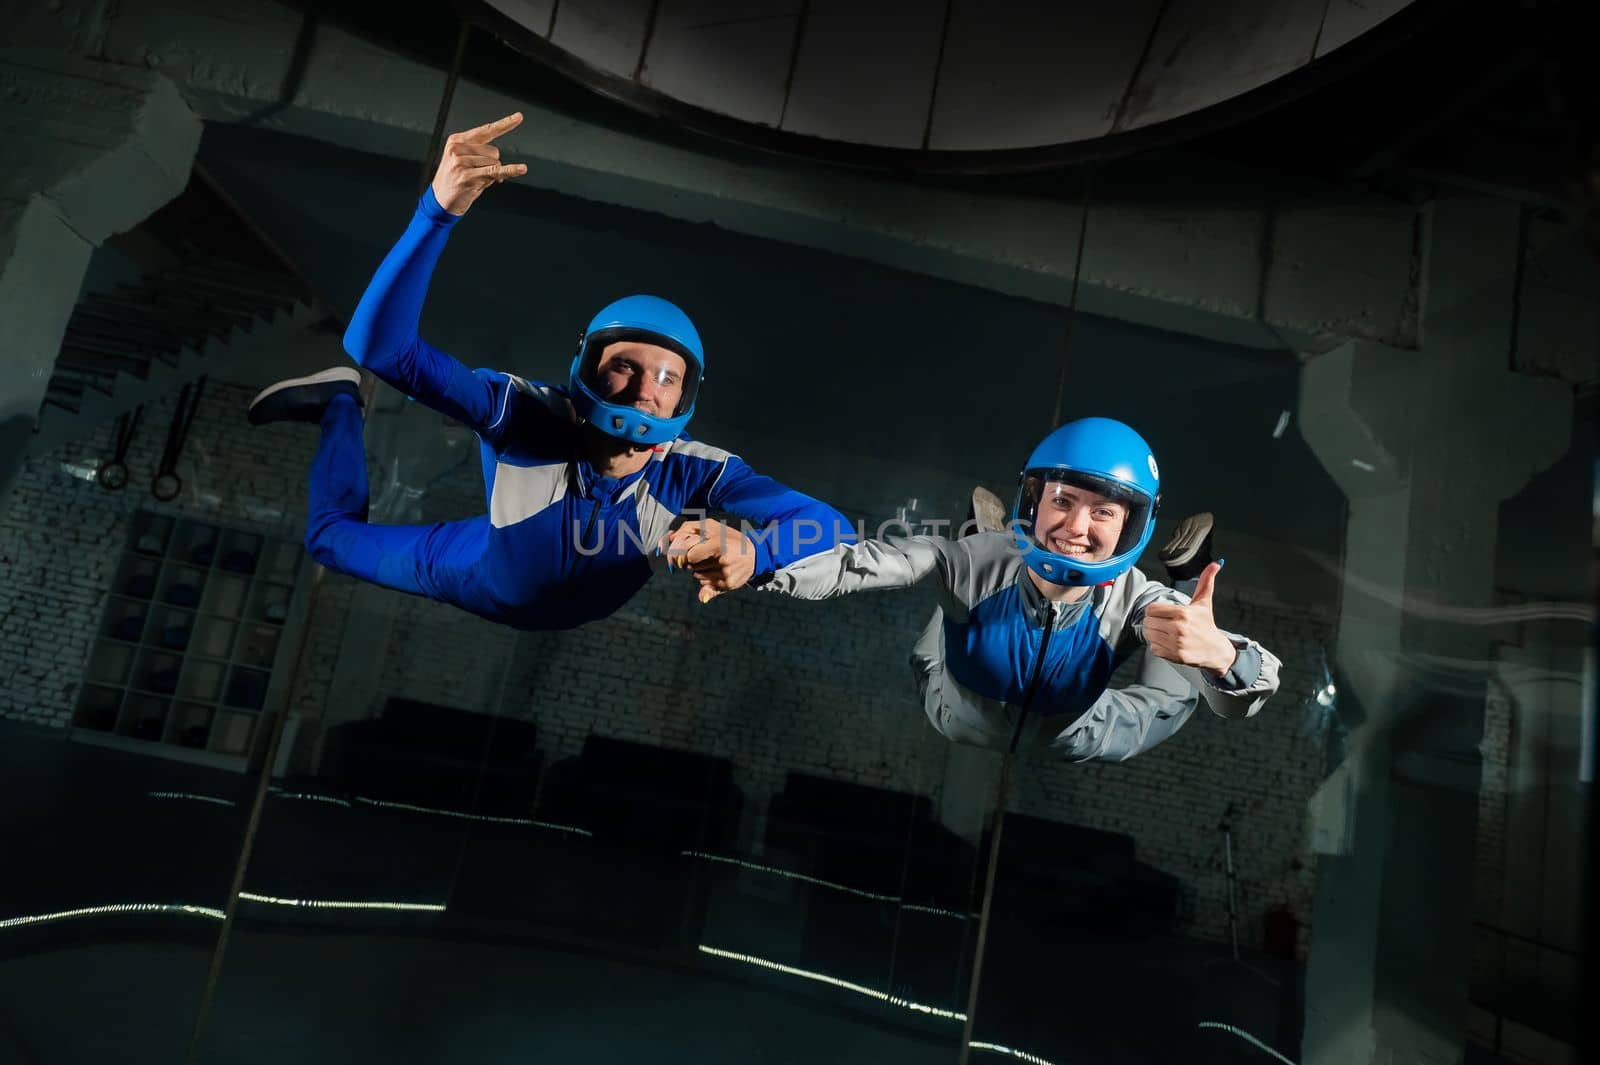 A man teaches a woman how to fly in a wind tunnel. Free fall simulator